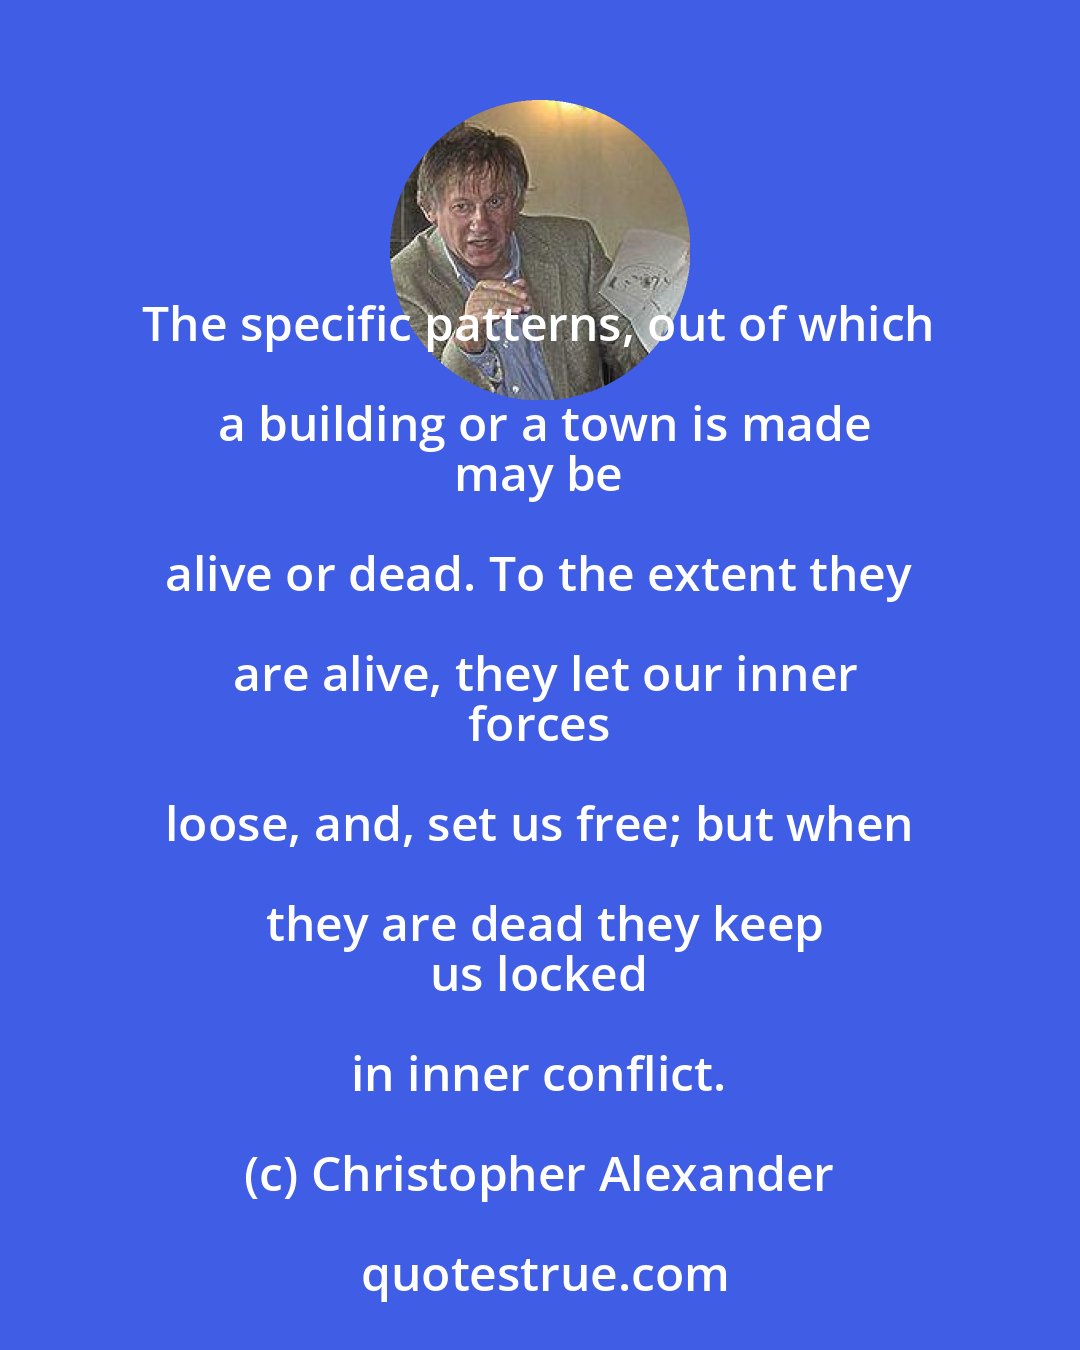 Christopher Alexander: The specific patterns, out of which a building or a town is made
 may be alive or dead. To the extent they are alive, they let our inner
 forces loose, and, set us free; but when they are dead they keep
 us locked in inner conflict.